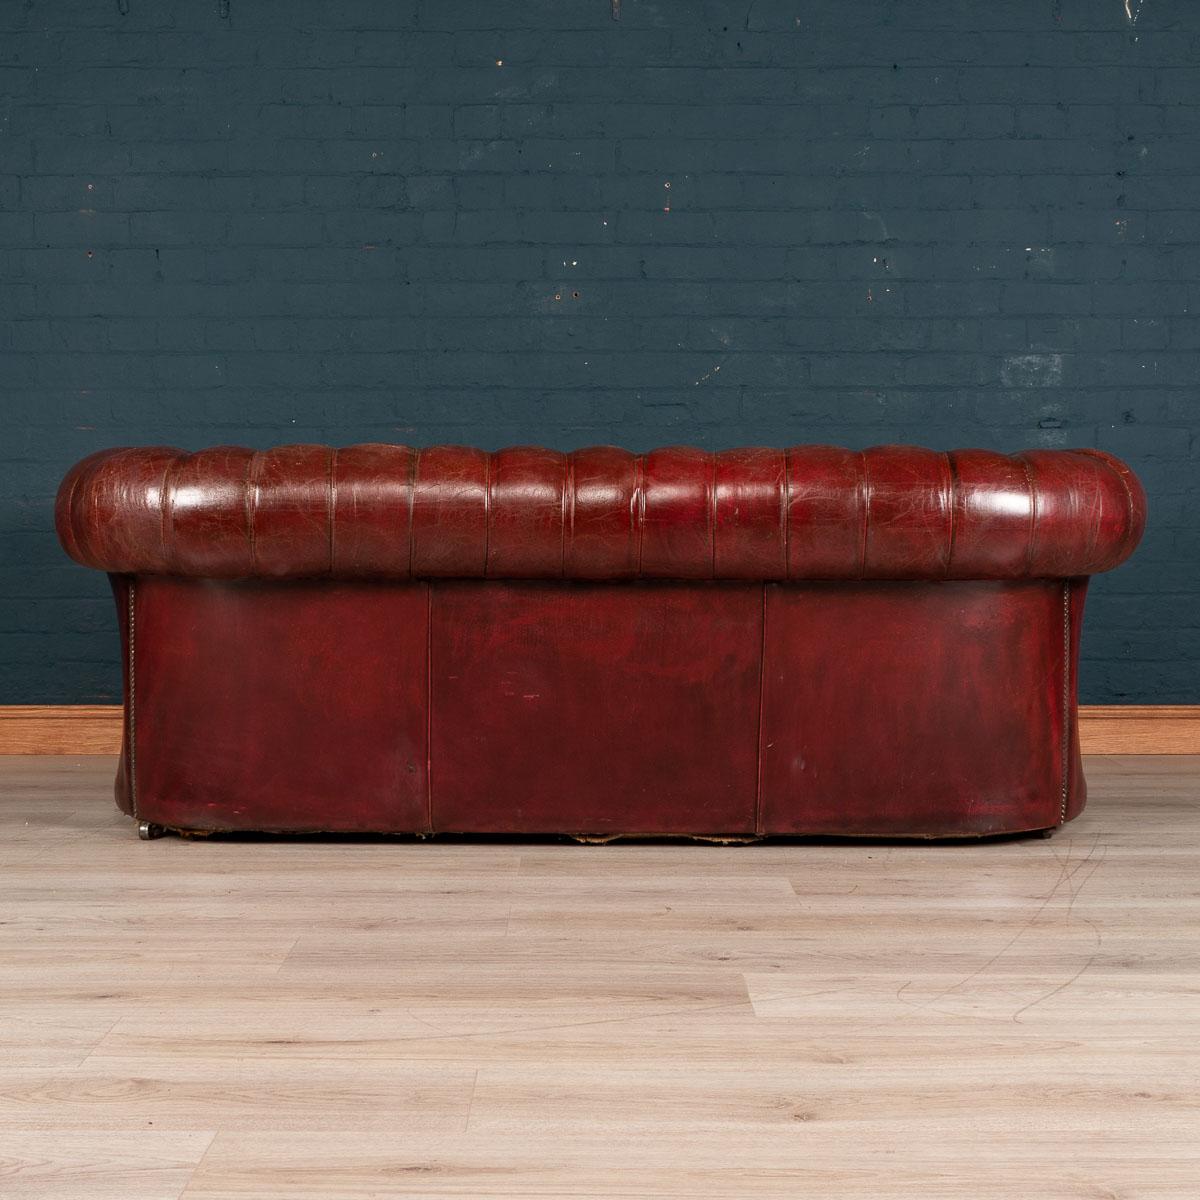 English Antique Chesterfield Leather Sofa with Button Down Seats, circa 1920